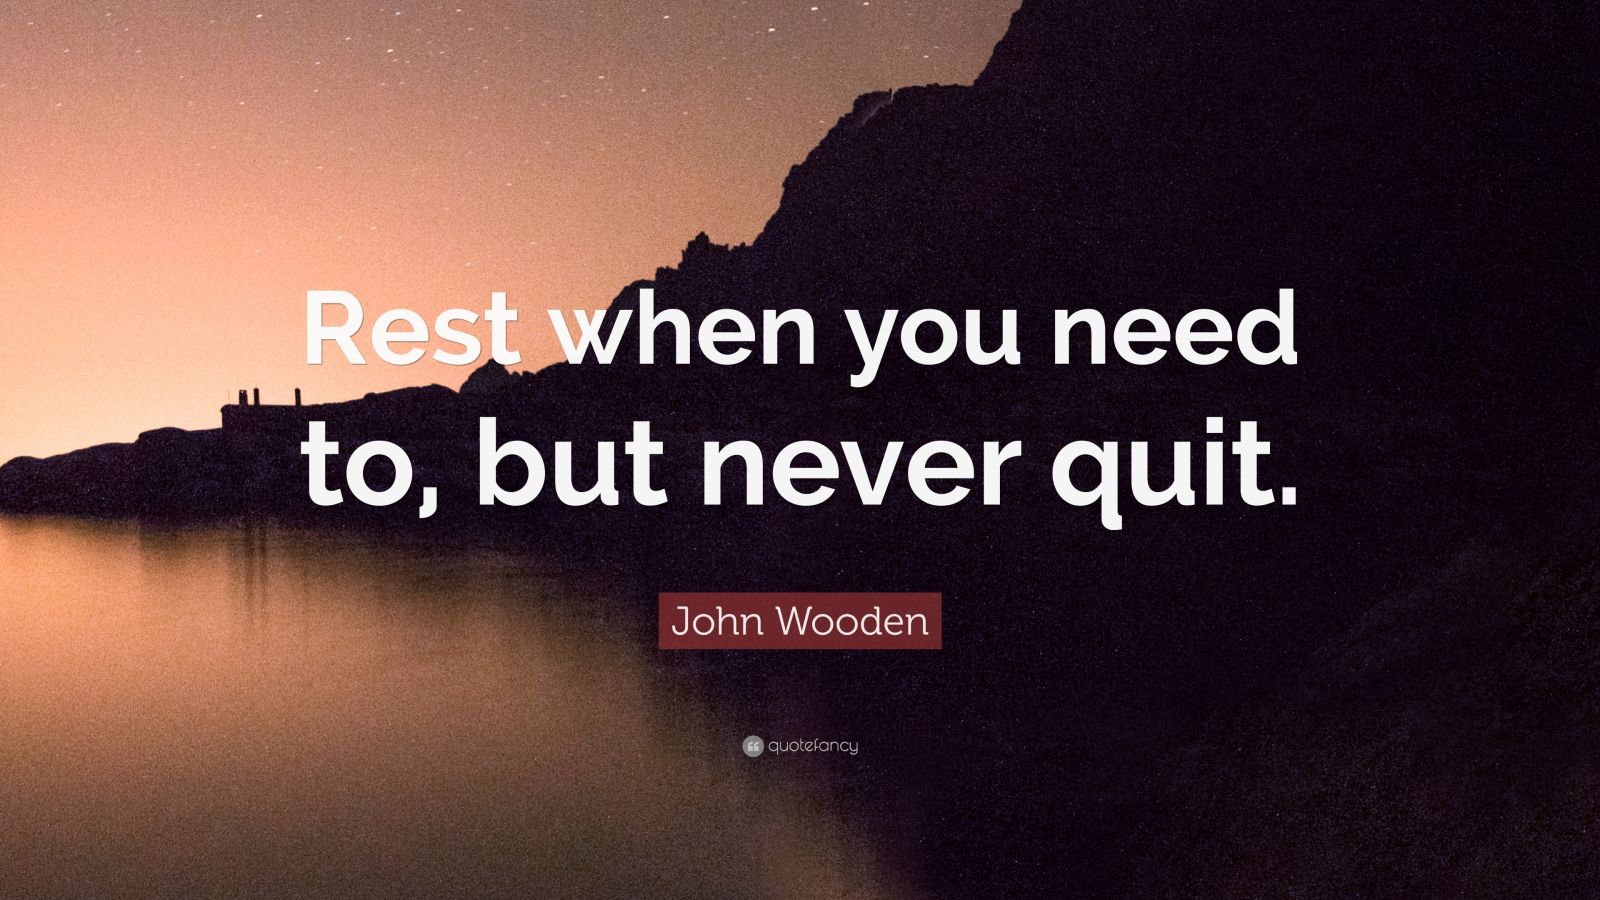 John Wooden Quote: “Rest when you need to, but never quit.” (7 ...